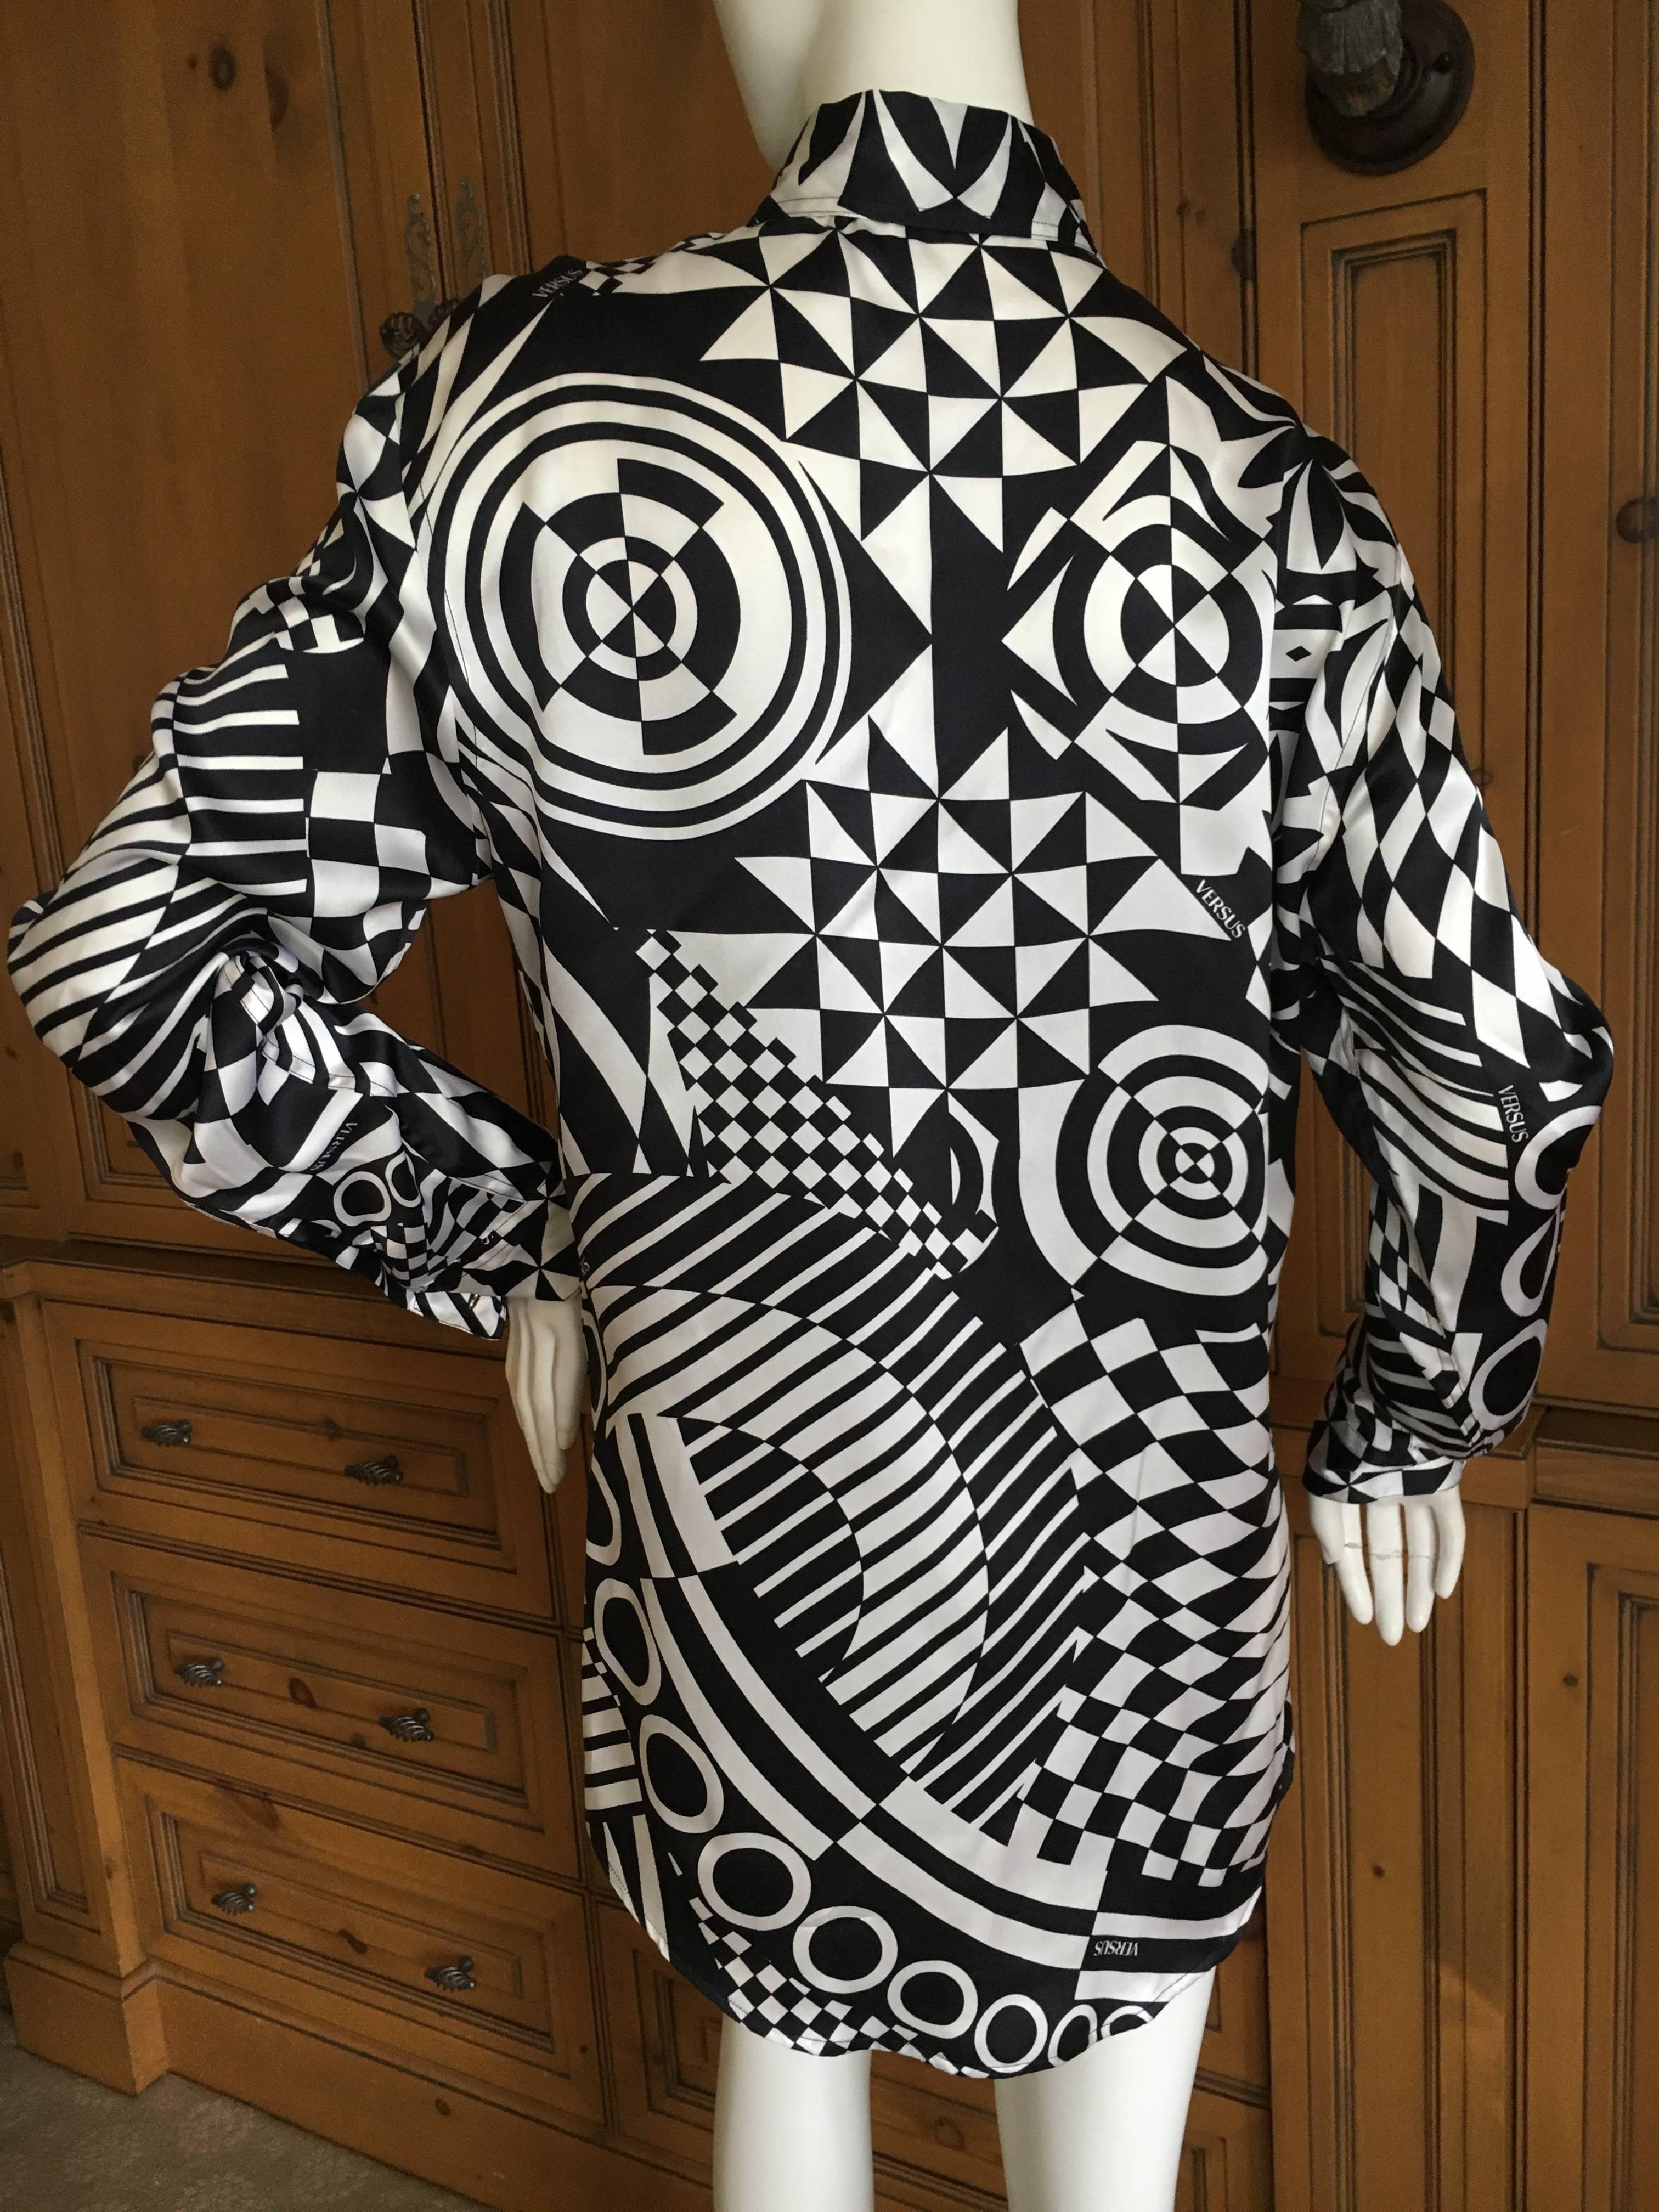 Wonderful silk op art blouse from Versus by Gianni Versace.
New with tags
Size 42
Bust 42